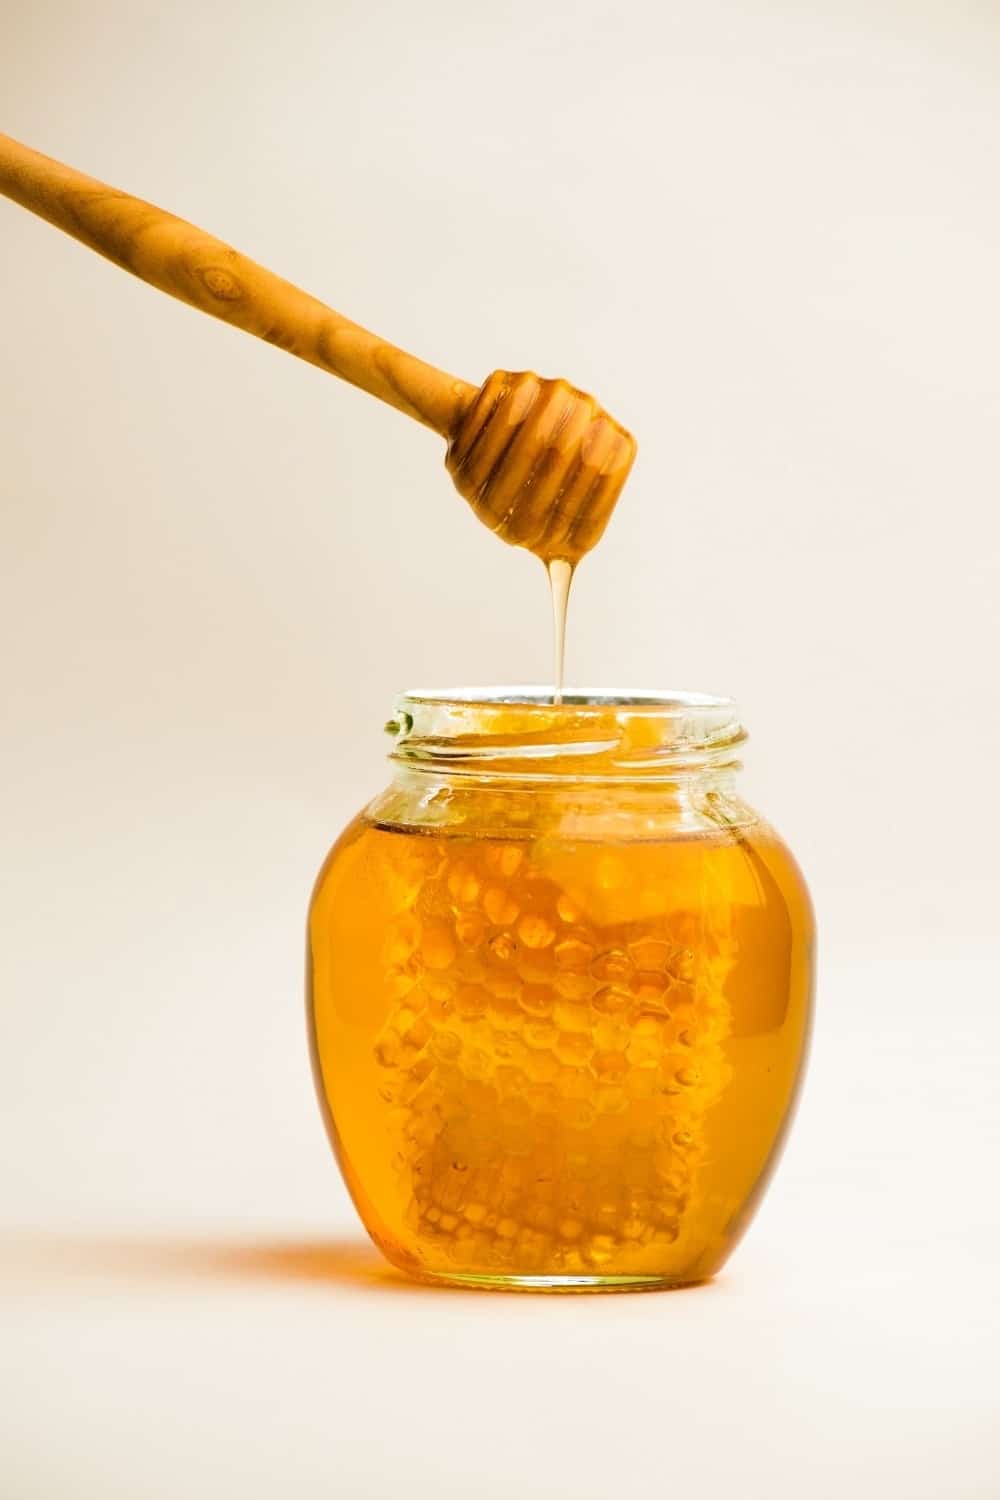 photo of a jar of honey with honeycomb inside